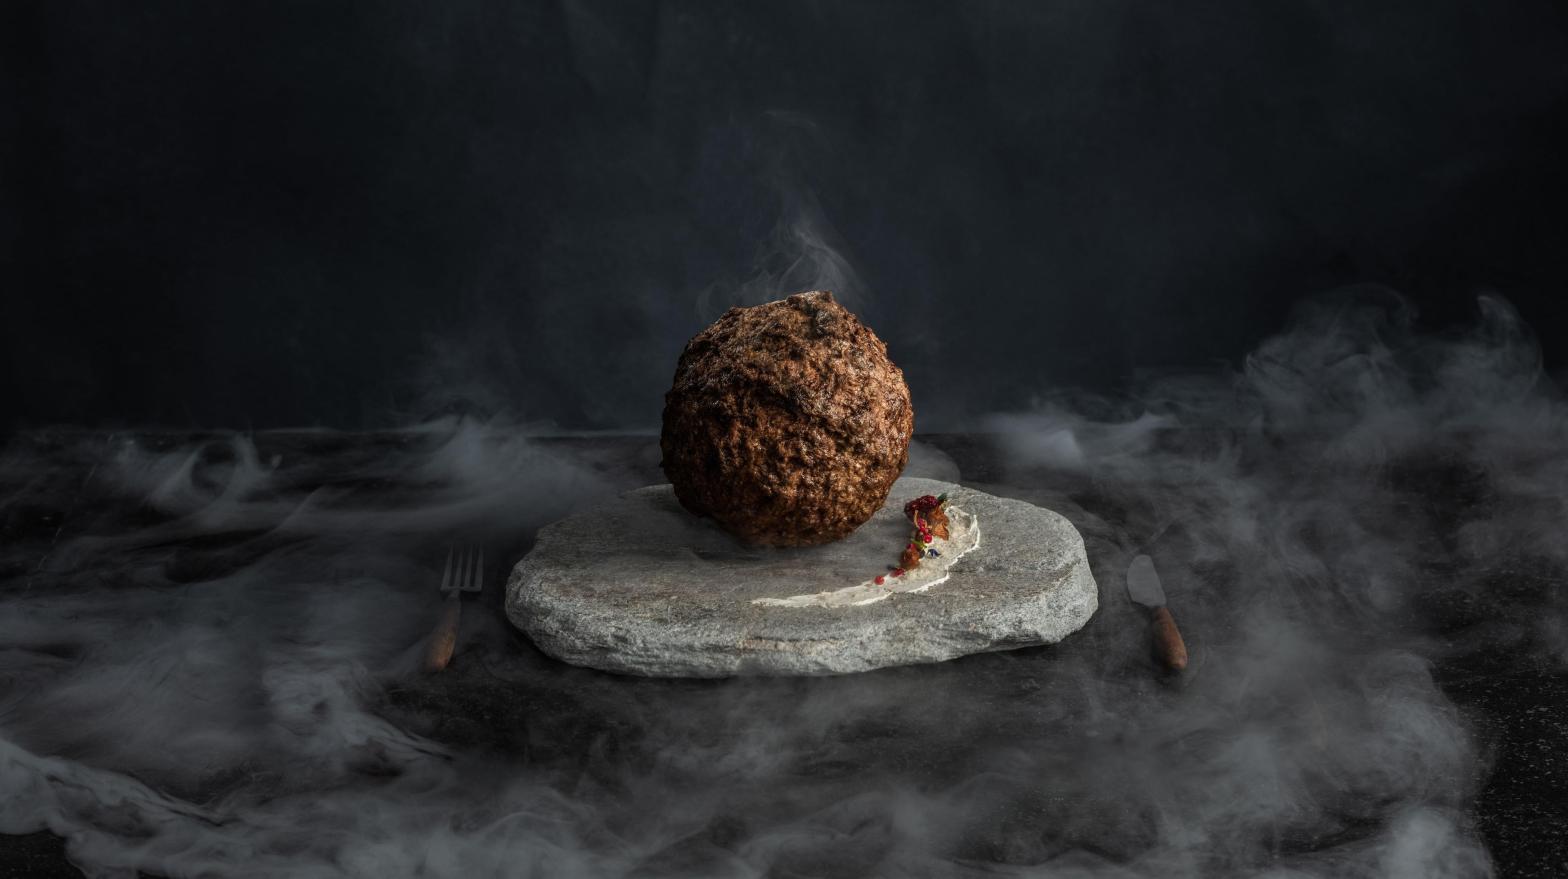 A mostly sheep meatball with, yes, mammoth protein in it. (Image: Aico Lind)